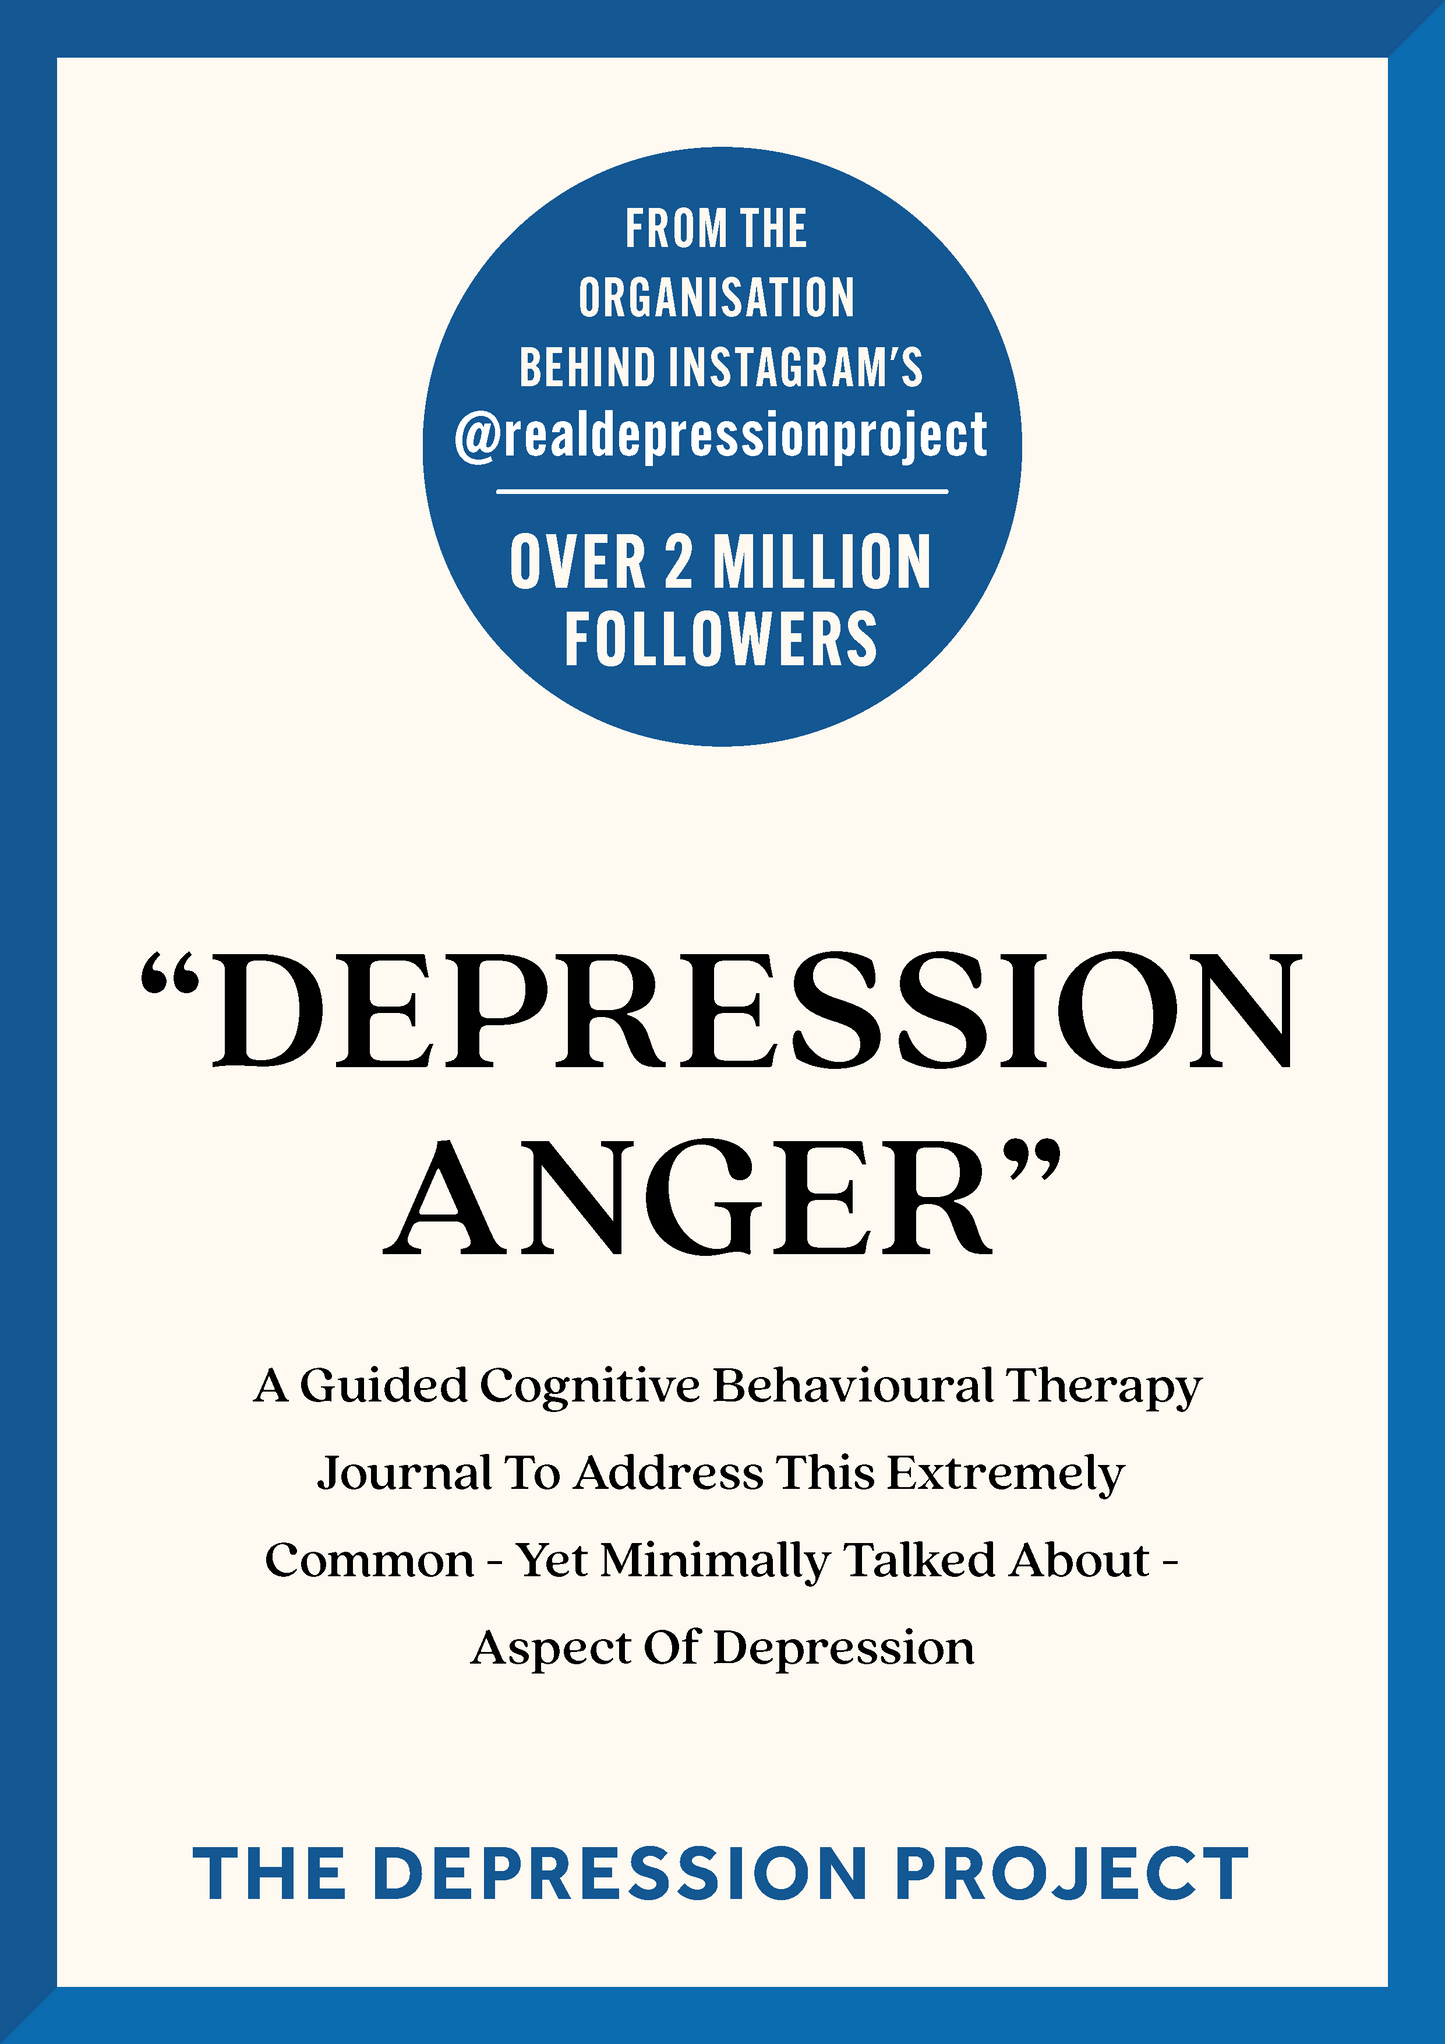 The "Depression Anger" Journal